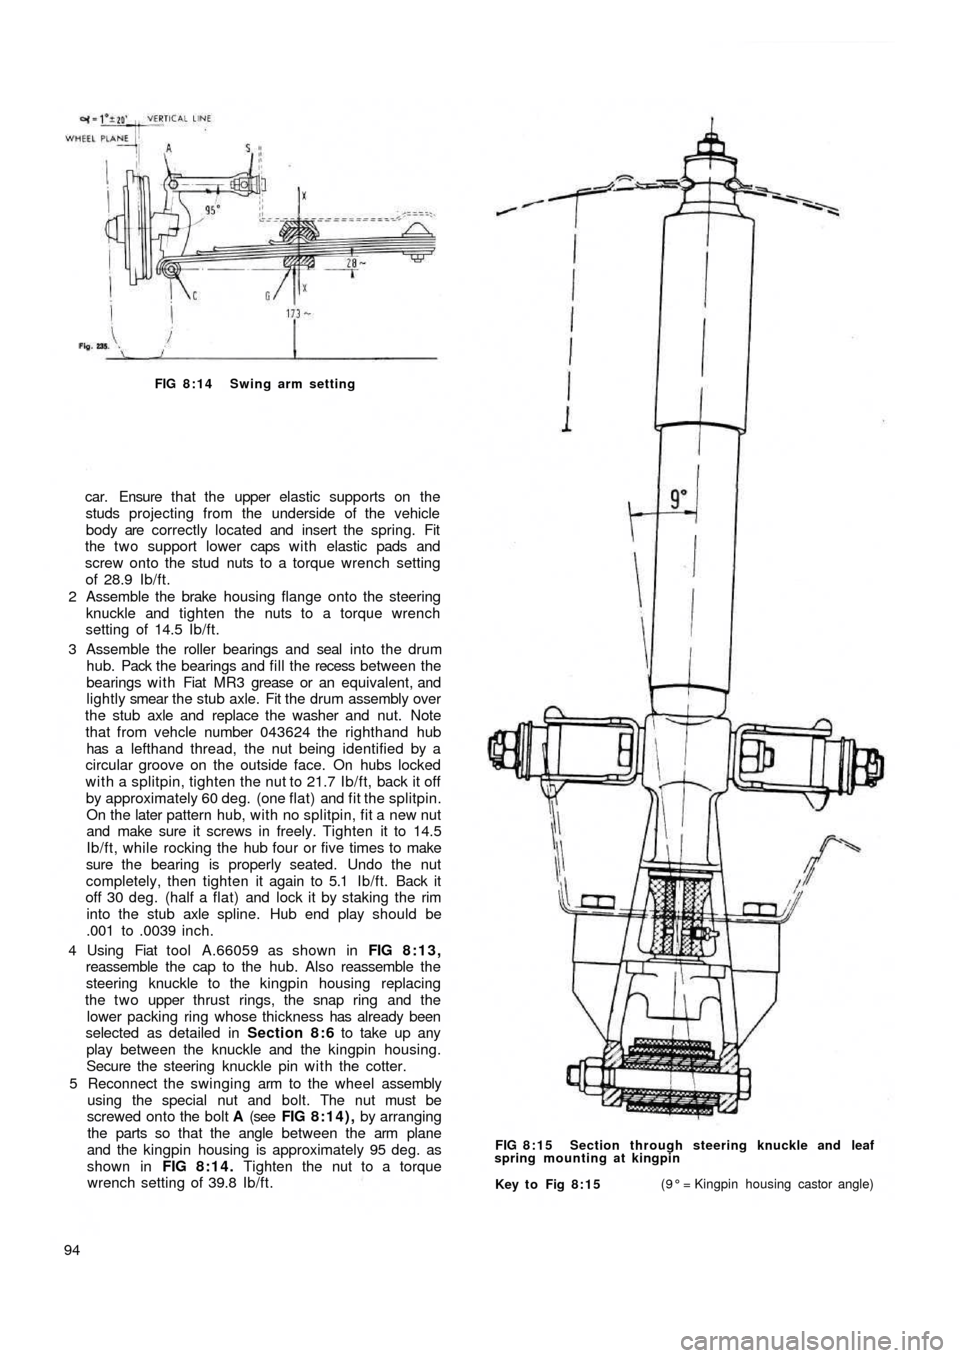 FIAT 500 1971 1.G Workshop Manual FIG 8:14 Swing arm setting
car. Ensure t h a t the  upper elastic supports on the
studs projecting from the underside of the vehicle
body are correctly located and insert the spring. Fit
the two suppo